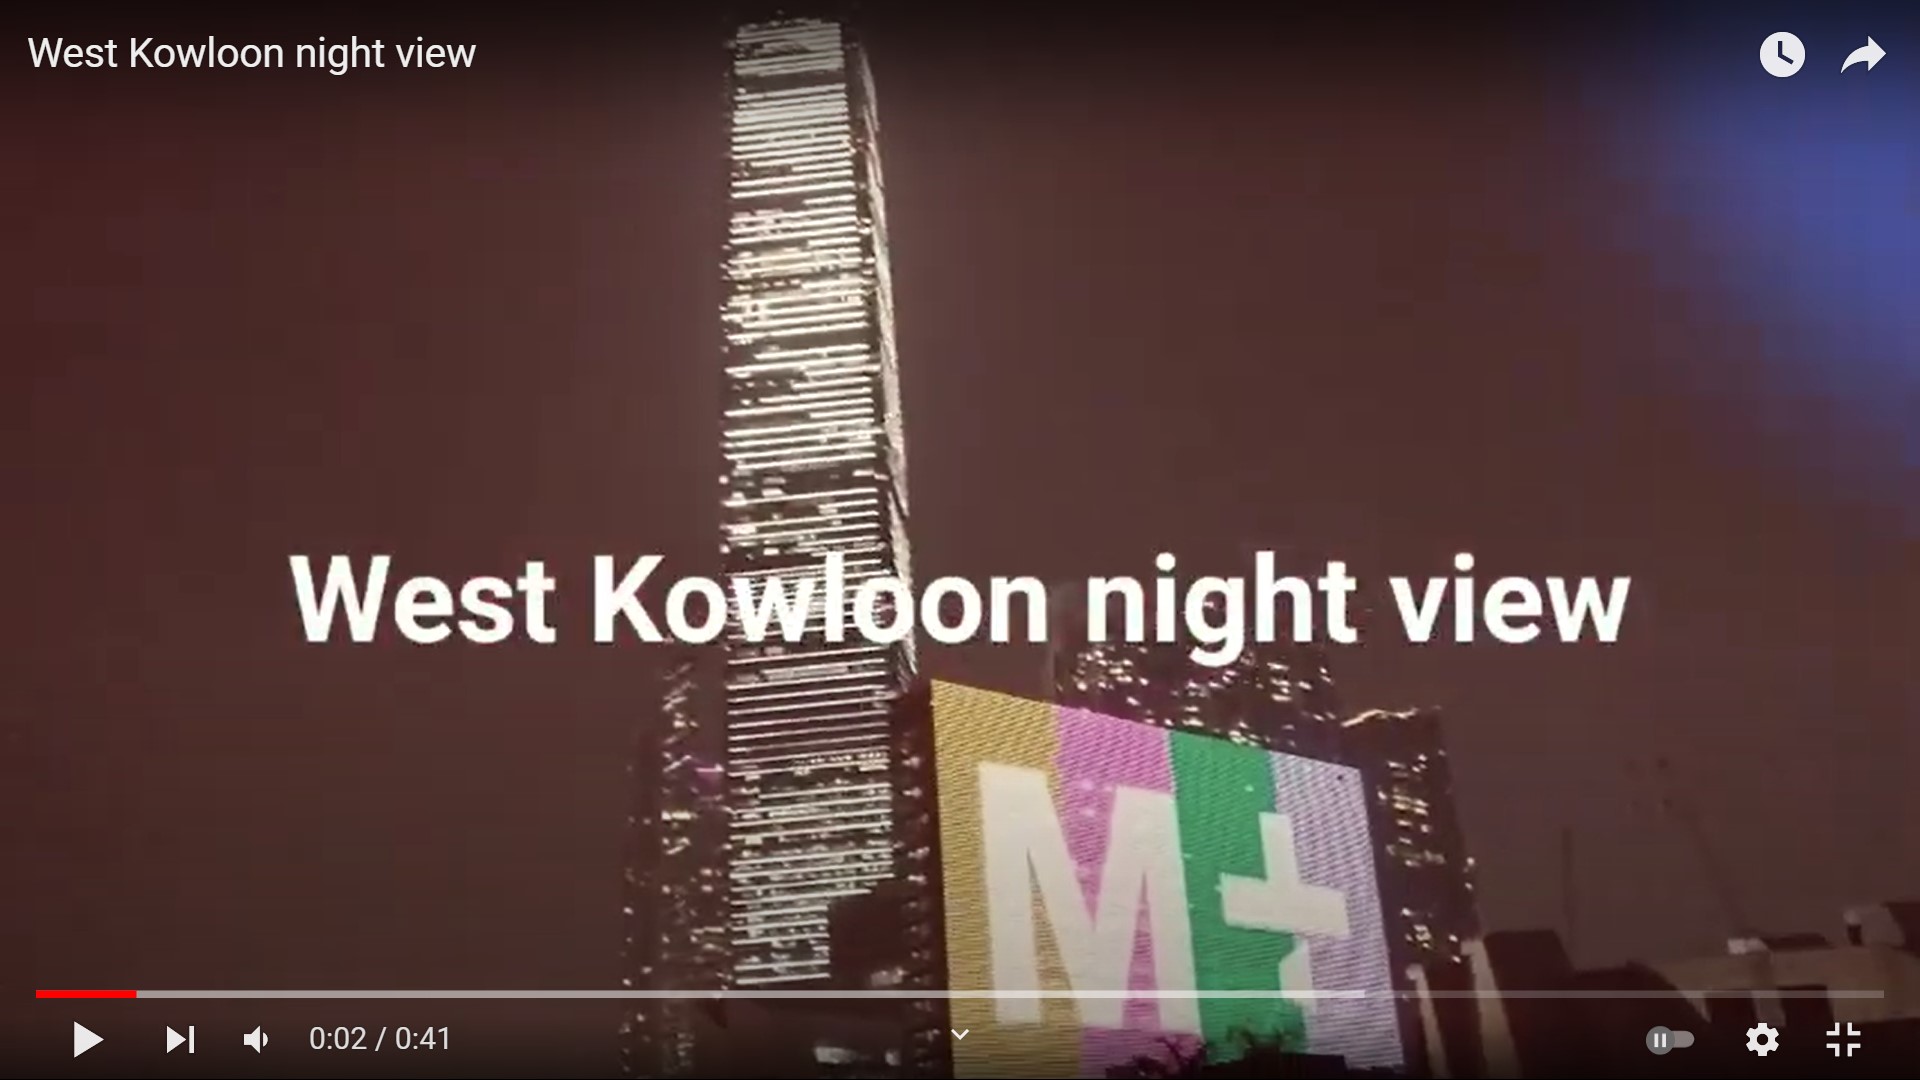 Frank’s “West Kowloon night view” snapshots video